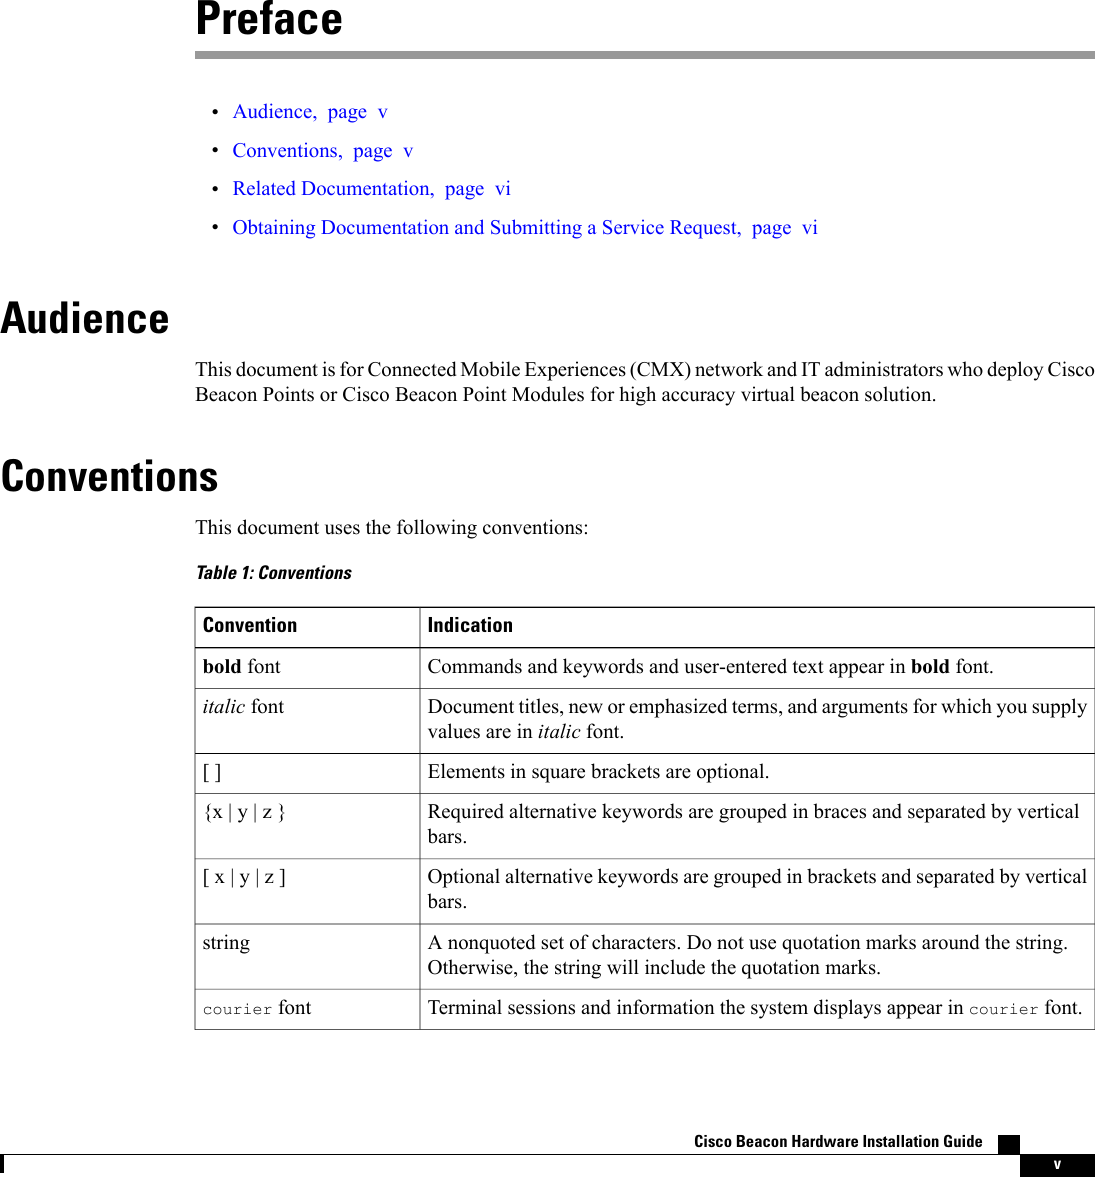 Preface•Audience, page v•Conventions, page v•Related Documentation, page vi•Obtaining Documentation and Submitting a Service Request, page viAudienceThis document is for Connected Mobile Experiences (CMX) network and IT administrators who deploy CiscoBeacon Points or Cisco Beacon Point Modules for high accuracy virtual beacon solution.ConventionsThis document uses the following conventions:Table 1: ConventionsIndicationConventionCommands and keywords and user-entered text appear in bold font.bold fontDocument titles, new or emphasized terms, and arguments for which you supplyvalues are in italic font.italic fontElements in square brackets are optional.[ ]Required alternative keywords are grouped in braces and separated by verticalbars.{x | y | z }Optional alternative keywords are grouped in brackets and separated by verticalbars.[ x | y | z ]A nonquoted set of characters. Do not use quotation marks around the string.Otherwise, the string will include the quotation marks.stringTerminal sessions and information the system displays appear in courier font.courier fontCisco Beacon Hardware Installation Guide    v